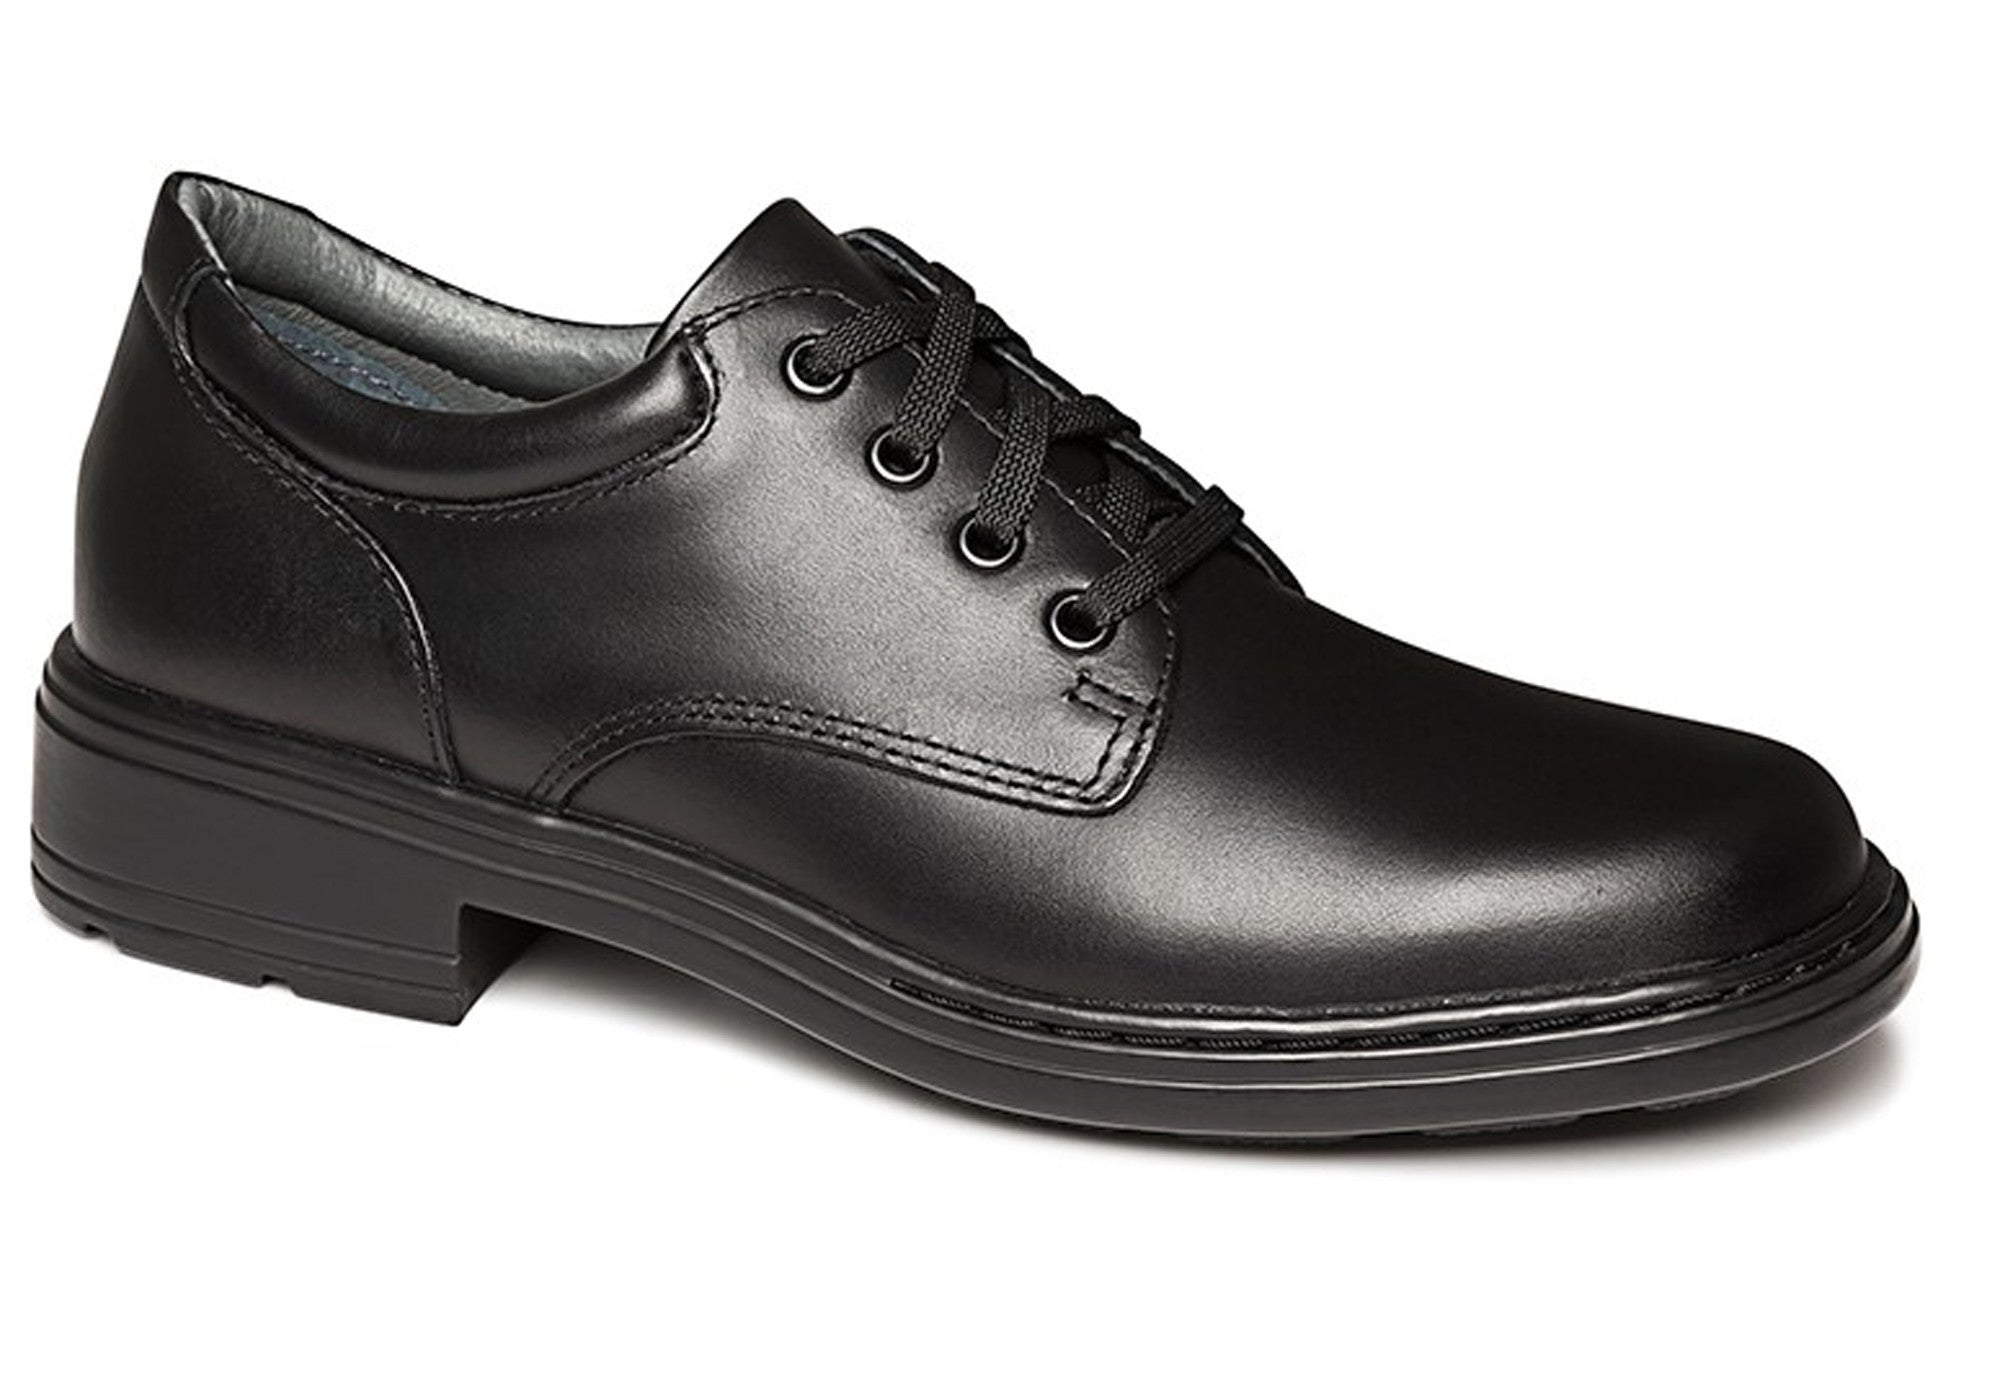 Infinity Black Leather School Shoes Brand Direct